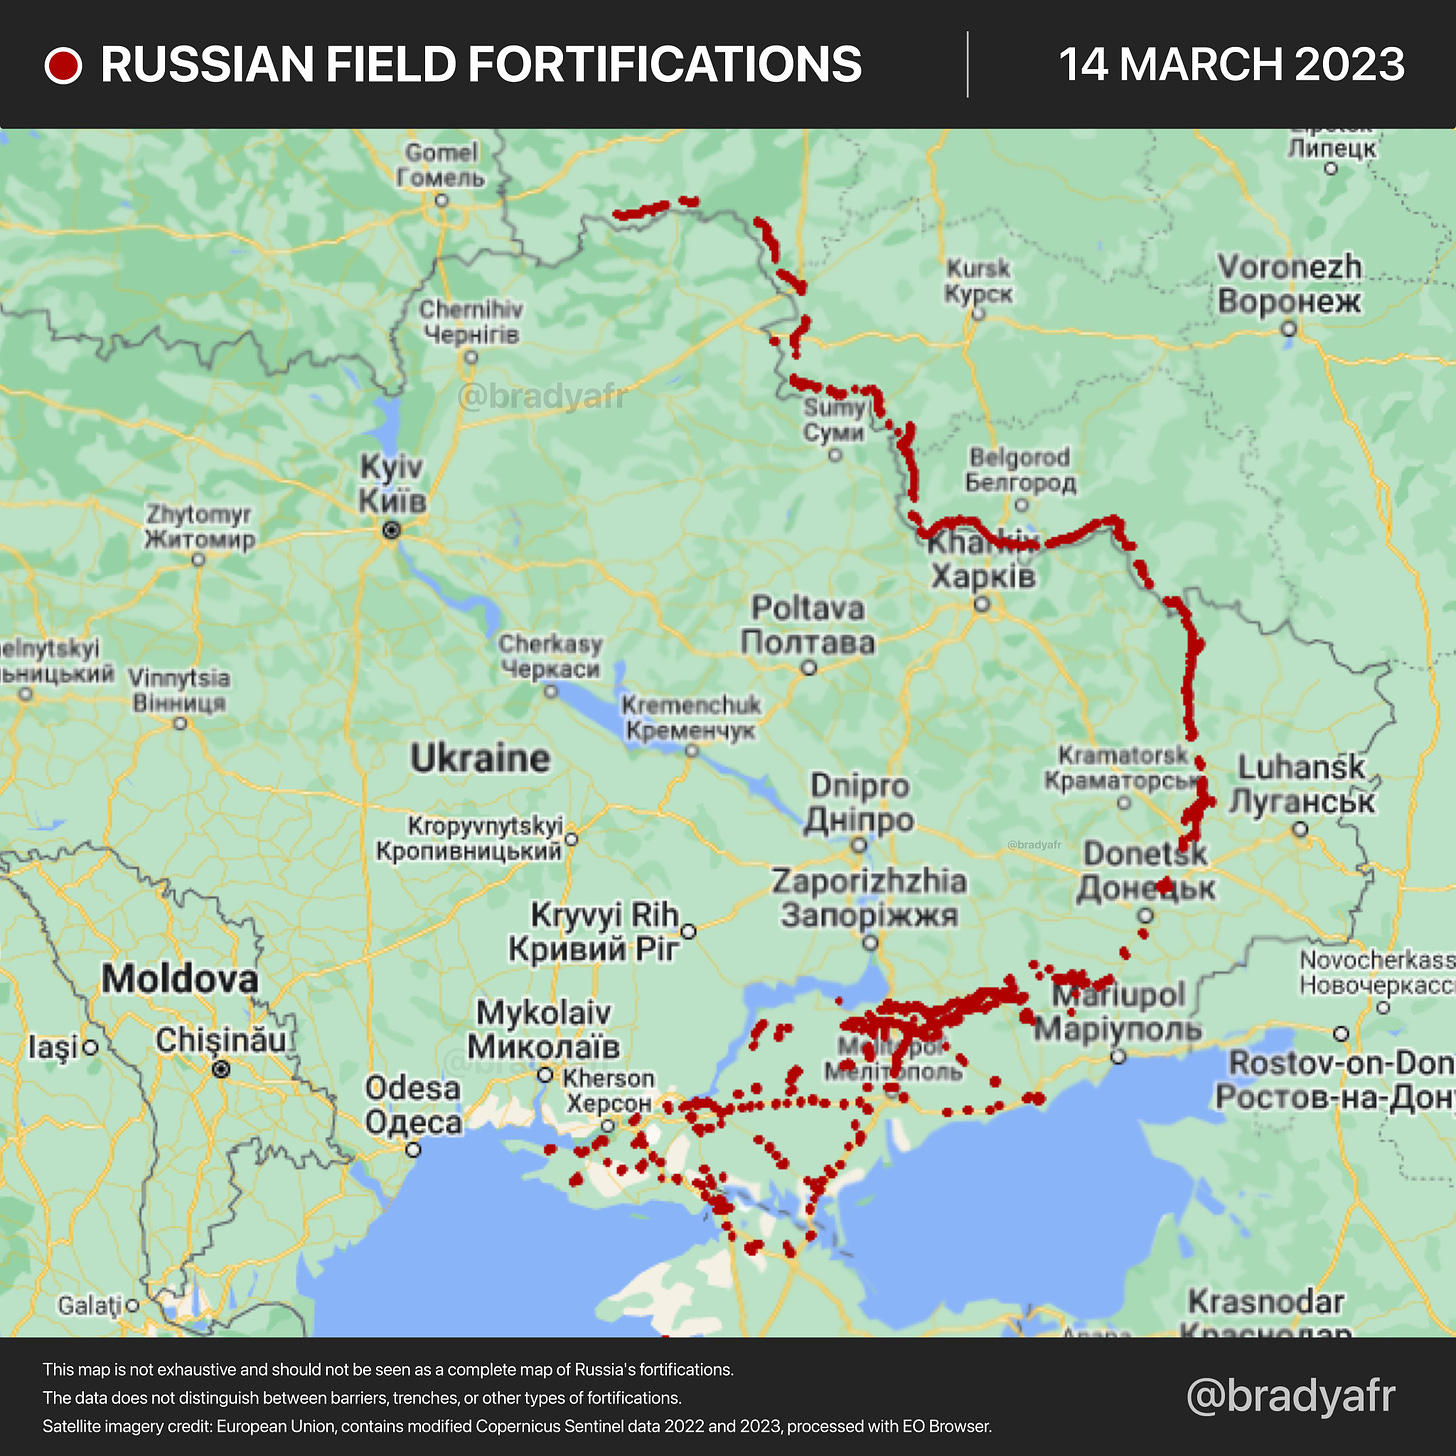 Brady Africk on Twitter: "New satellite imagery shows that Russian forces  have ramped up the construction of fortifications across occupied regions  of Ukraine. Check out a map of Russia's field fortifications here: